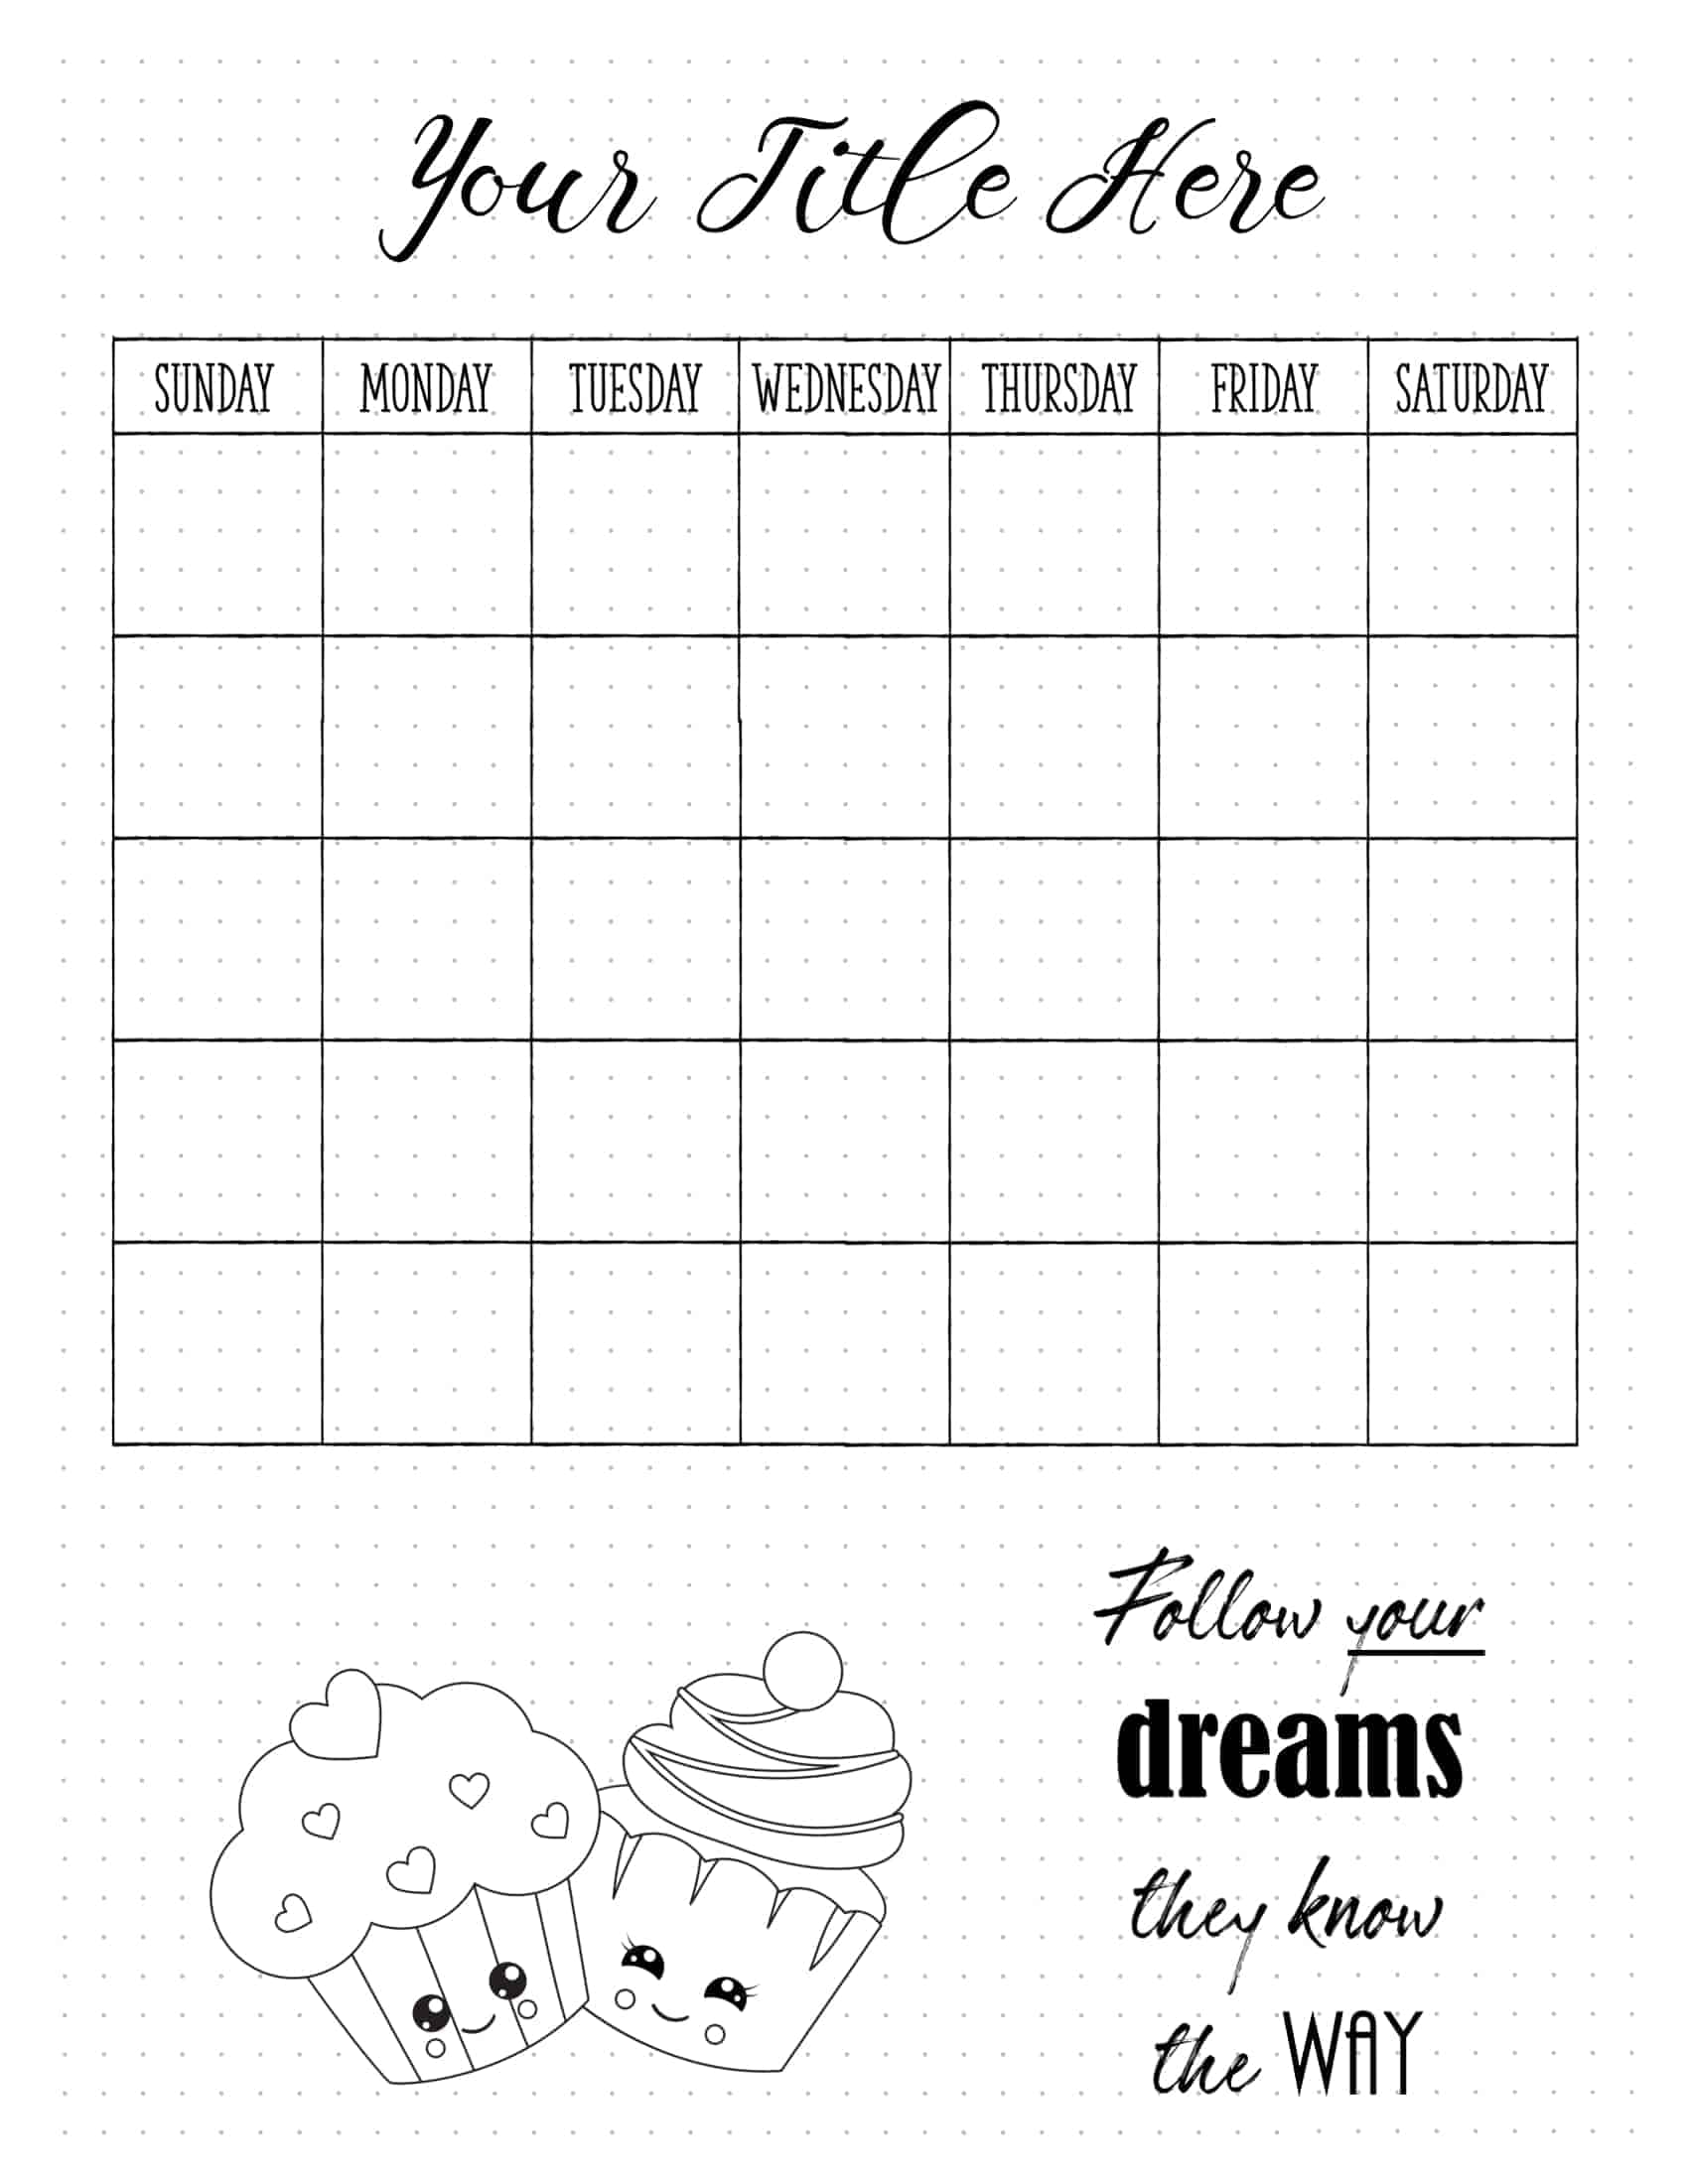 Bullet Journal Calendar Free Customizable Printable How To Yearly Calendar In Your Bullet